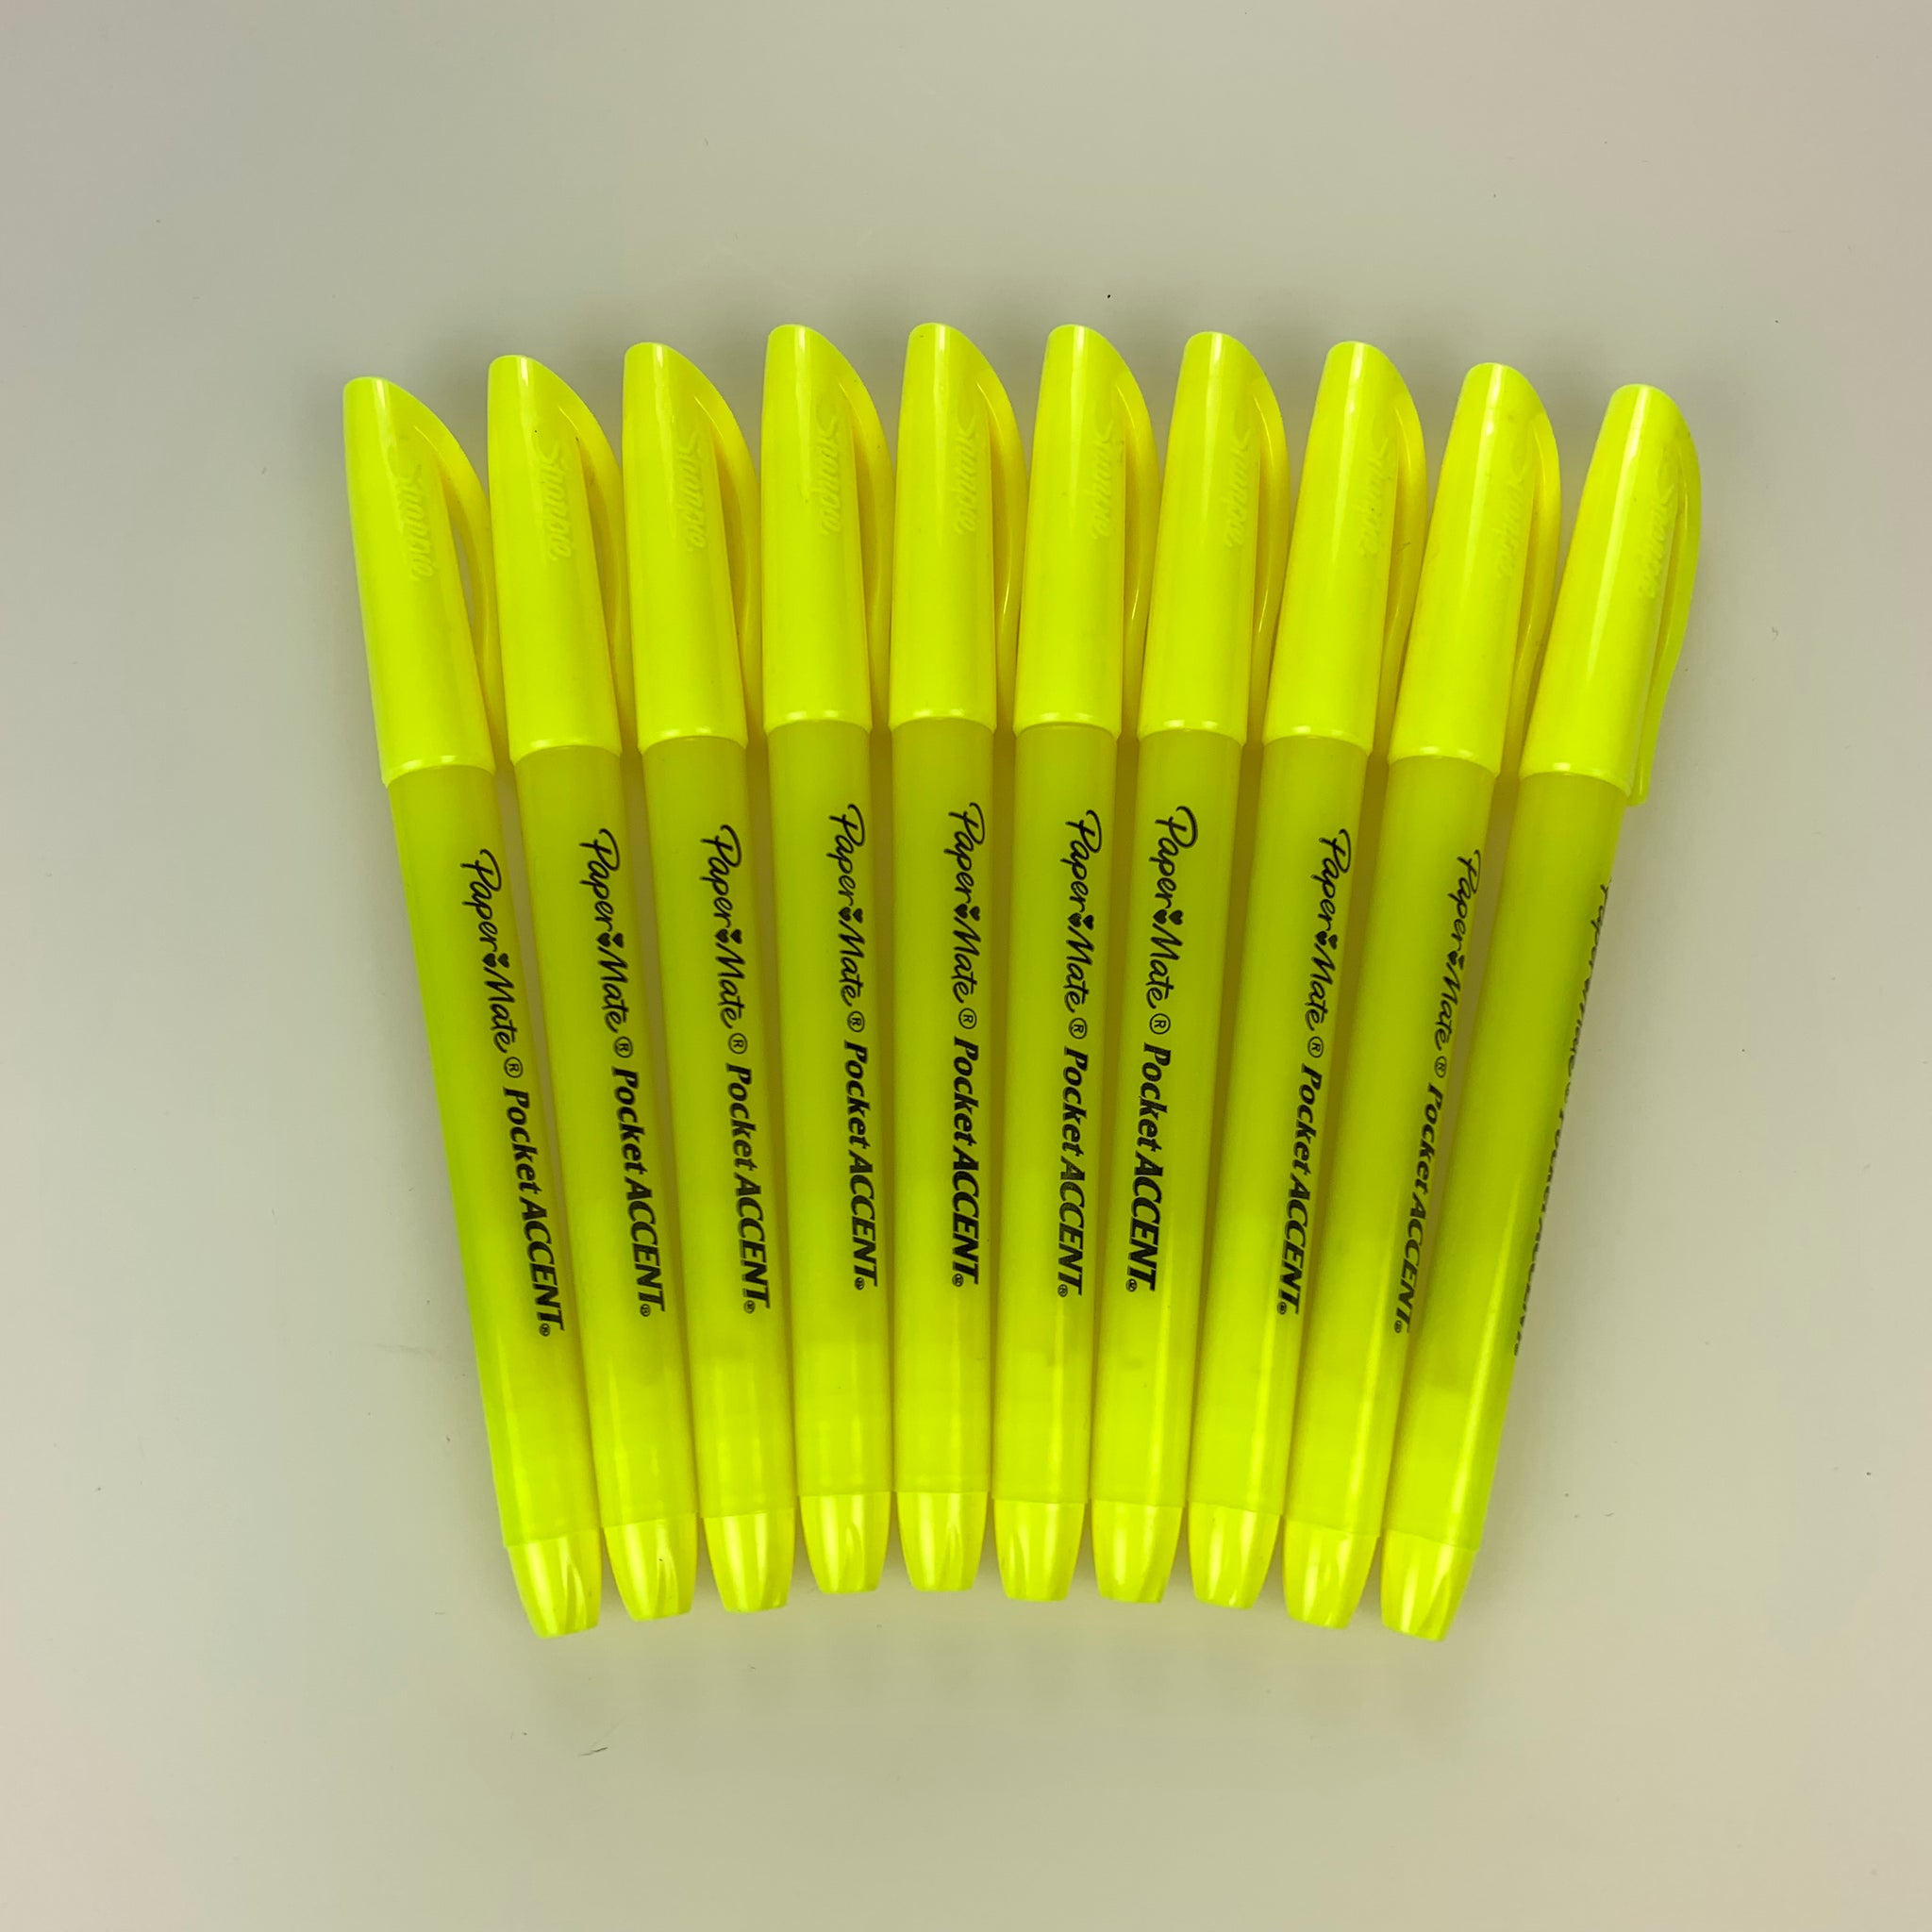 Papermate Papermate Pocket Accent Yellow Highlighter - 10 pack freeshipping - RiNo Distribution